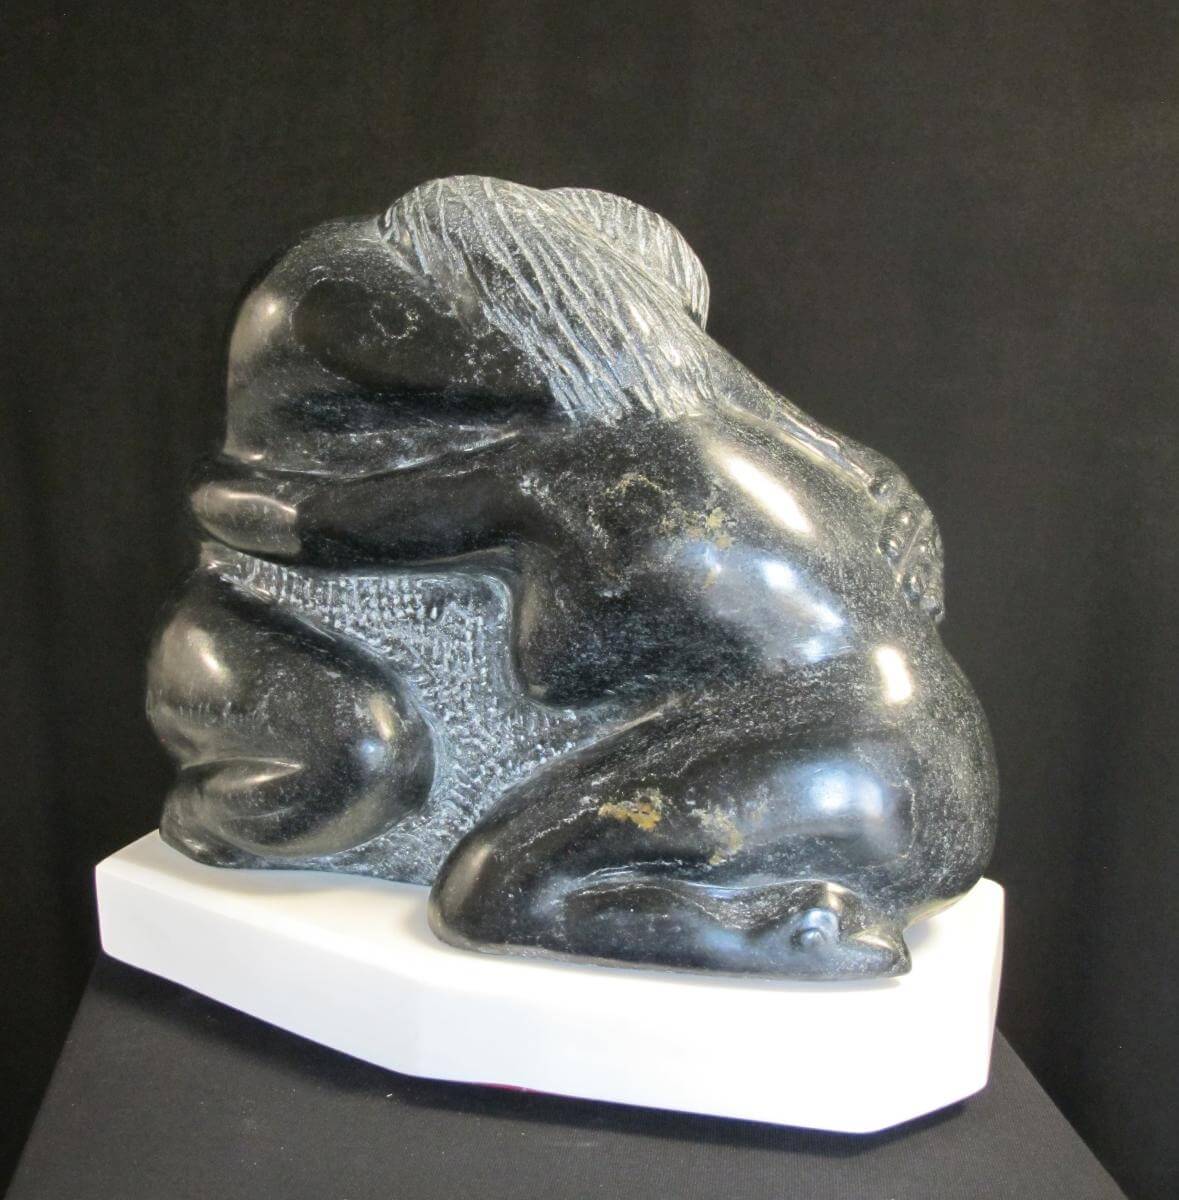 A sculpture of three animals sitting on top of each other.